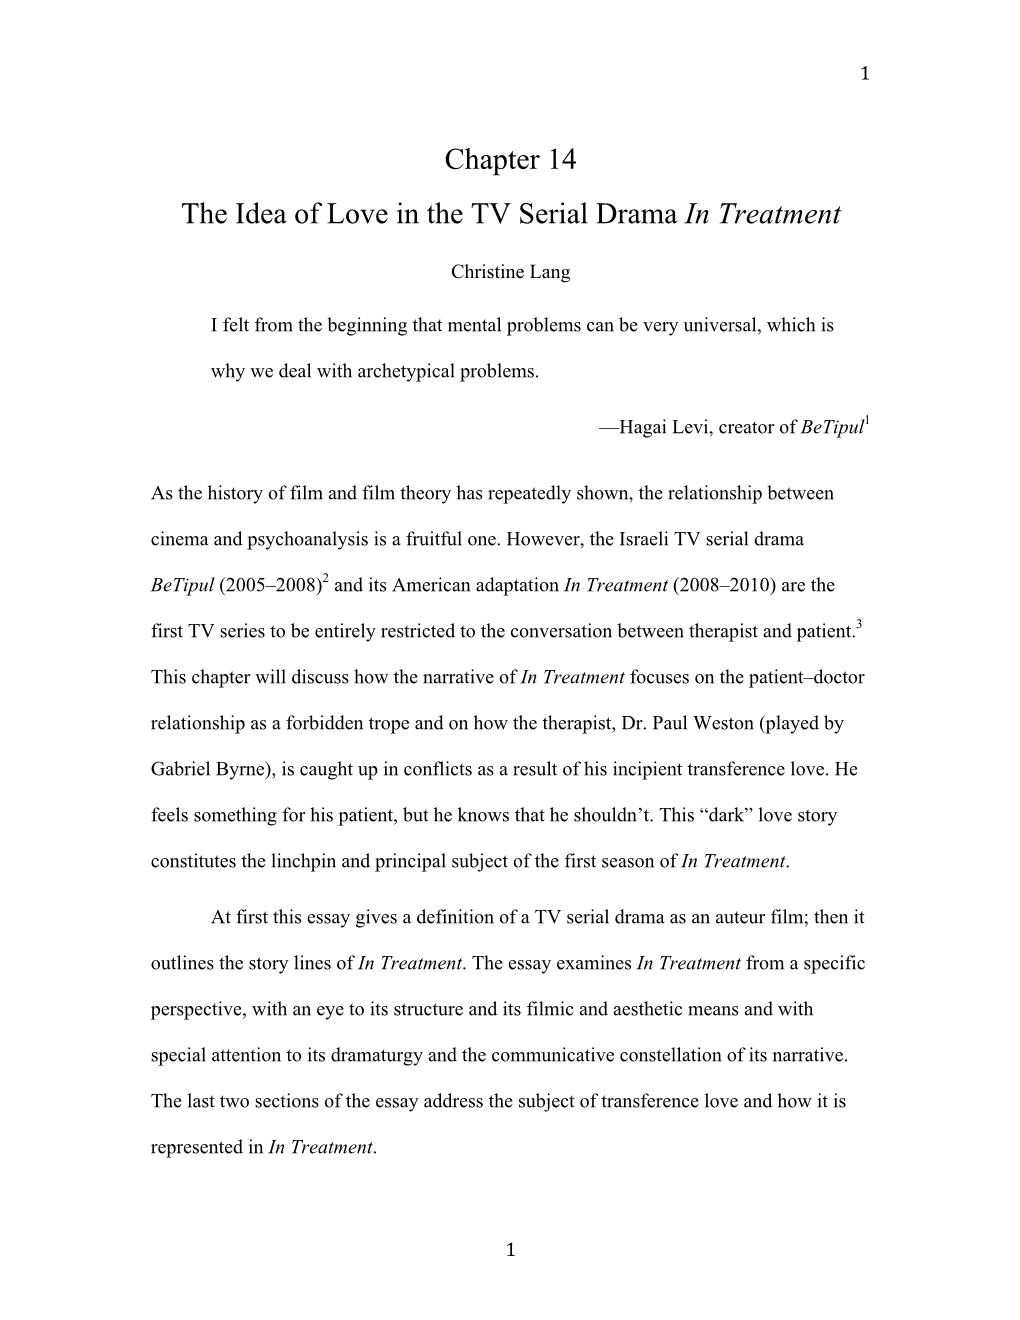 Chapter 14 the Idea of Love in the TV Serial Drama in Treatment